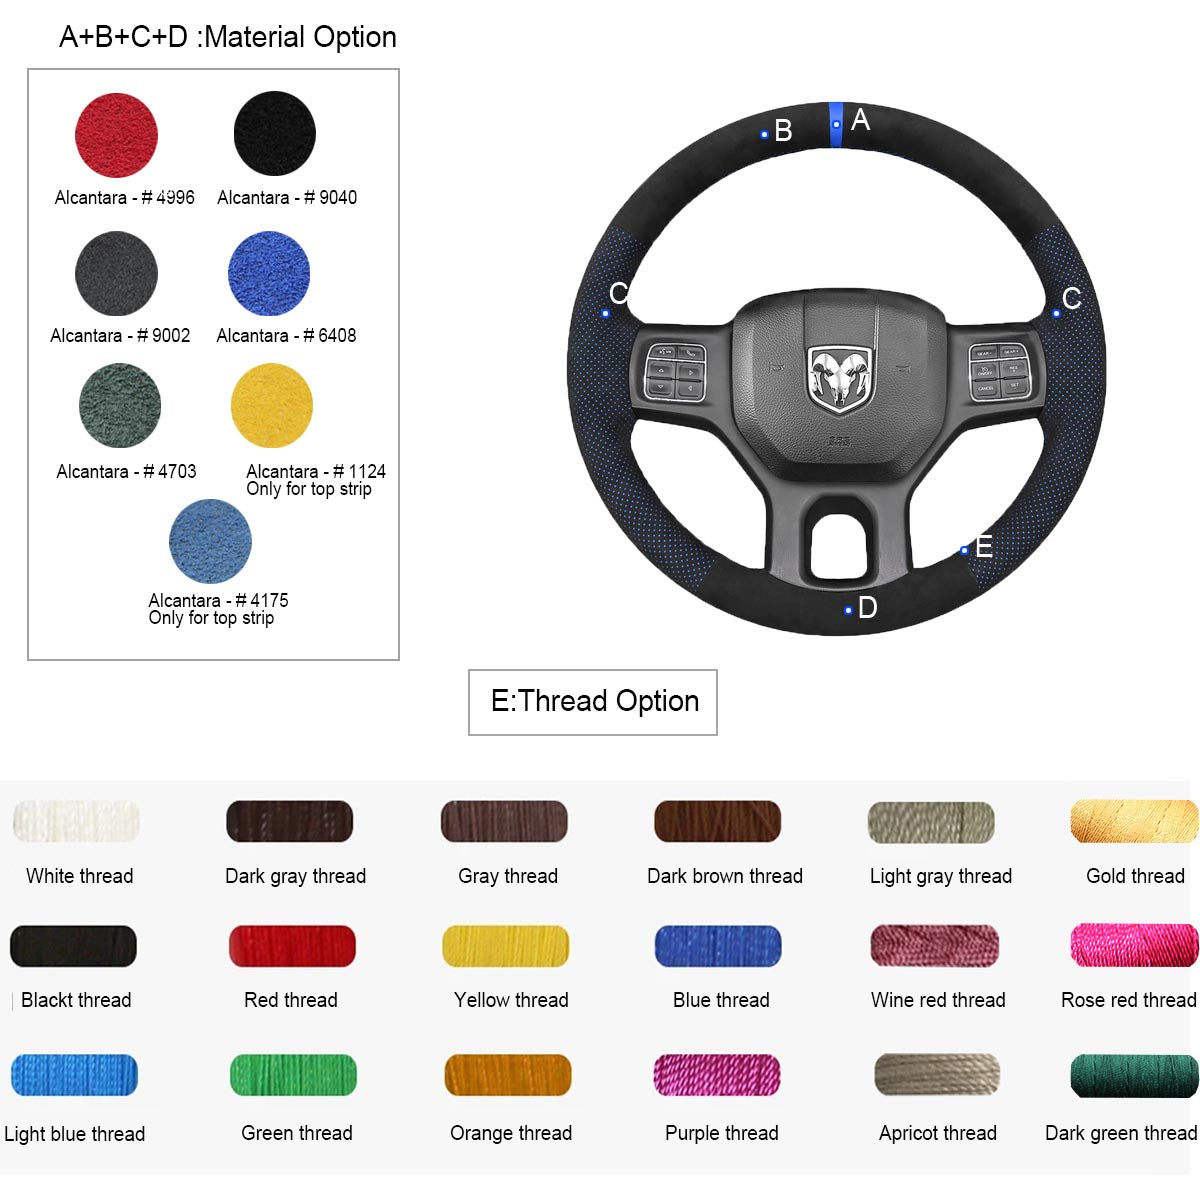 LQTENLEO Alcantara Leather Suede Hand-stitched Car Steering Wheel Cover for Dodge RAM 1500 Classic 2500 3500 5500 - LQTENLEO Official Store